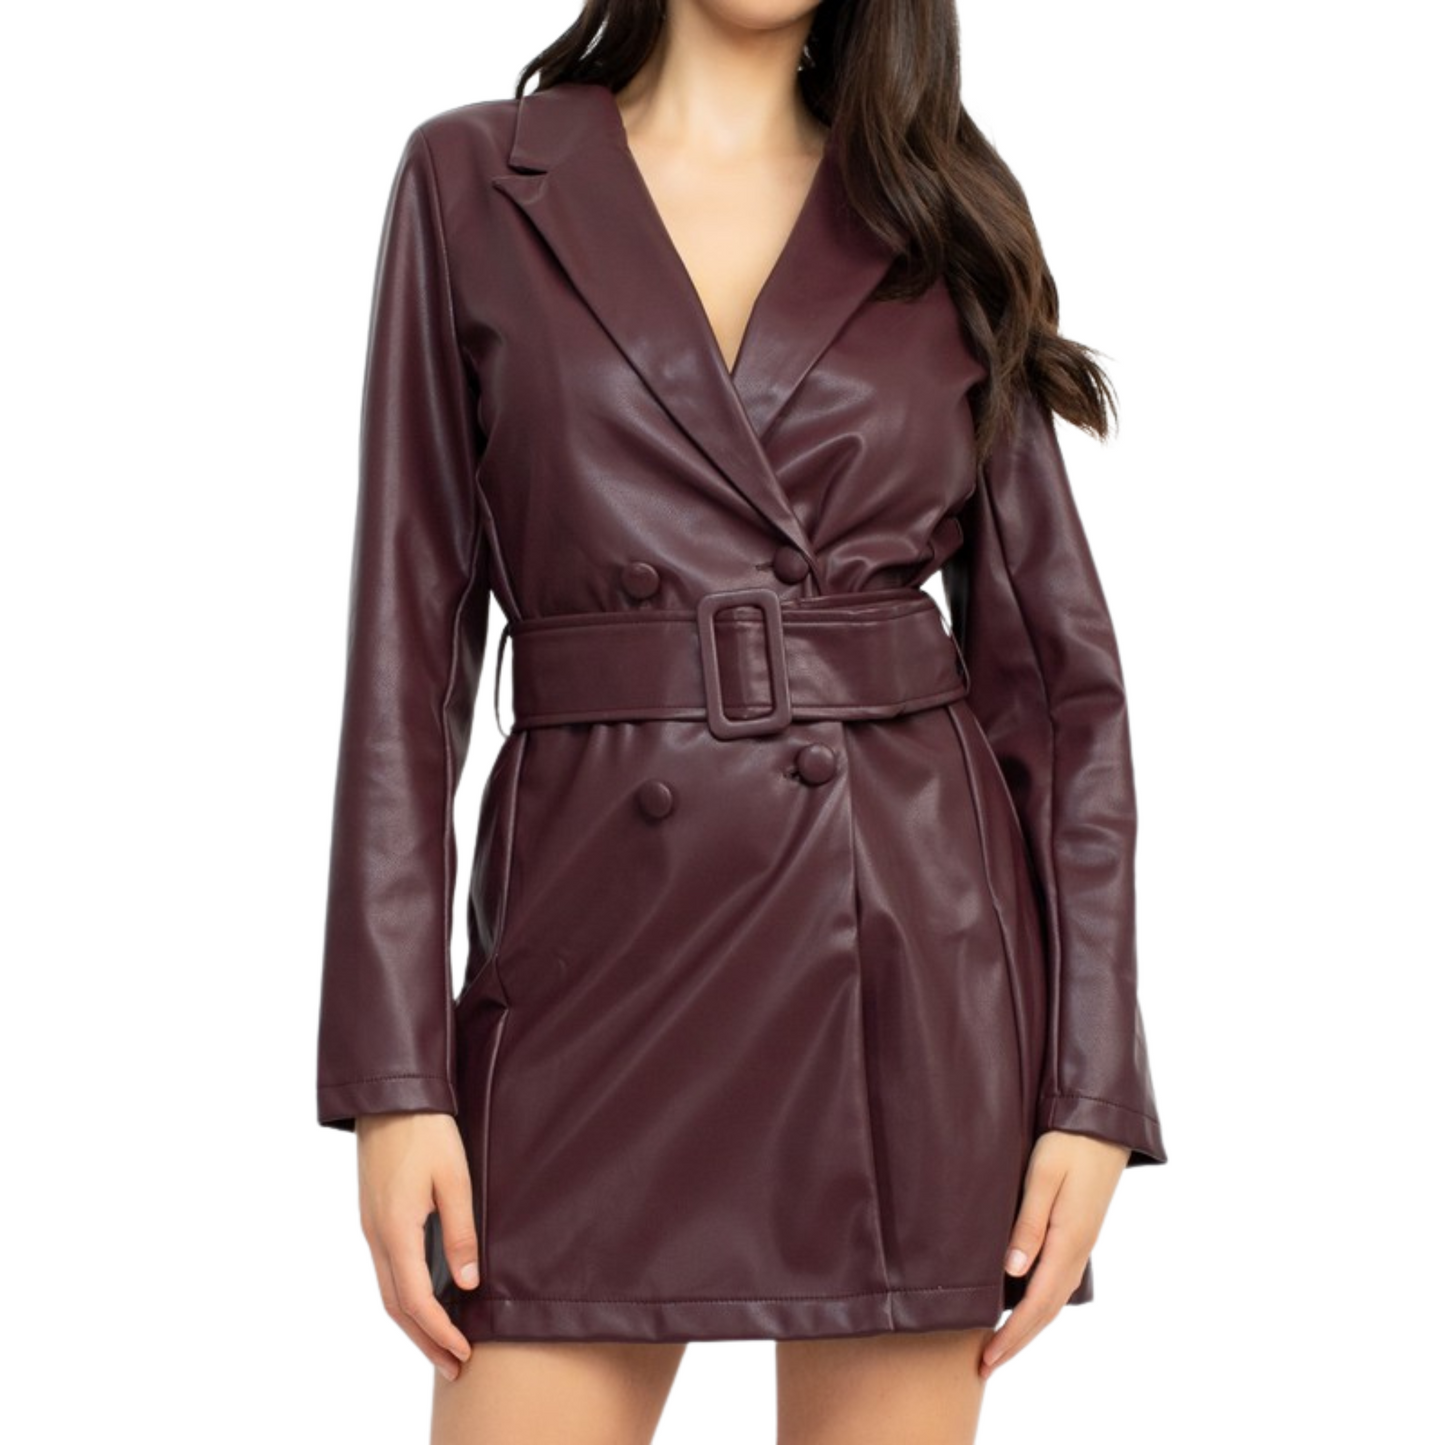 Story On Pleather Trench Coat Jacket Plum or Light Mauve (S-L)